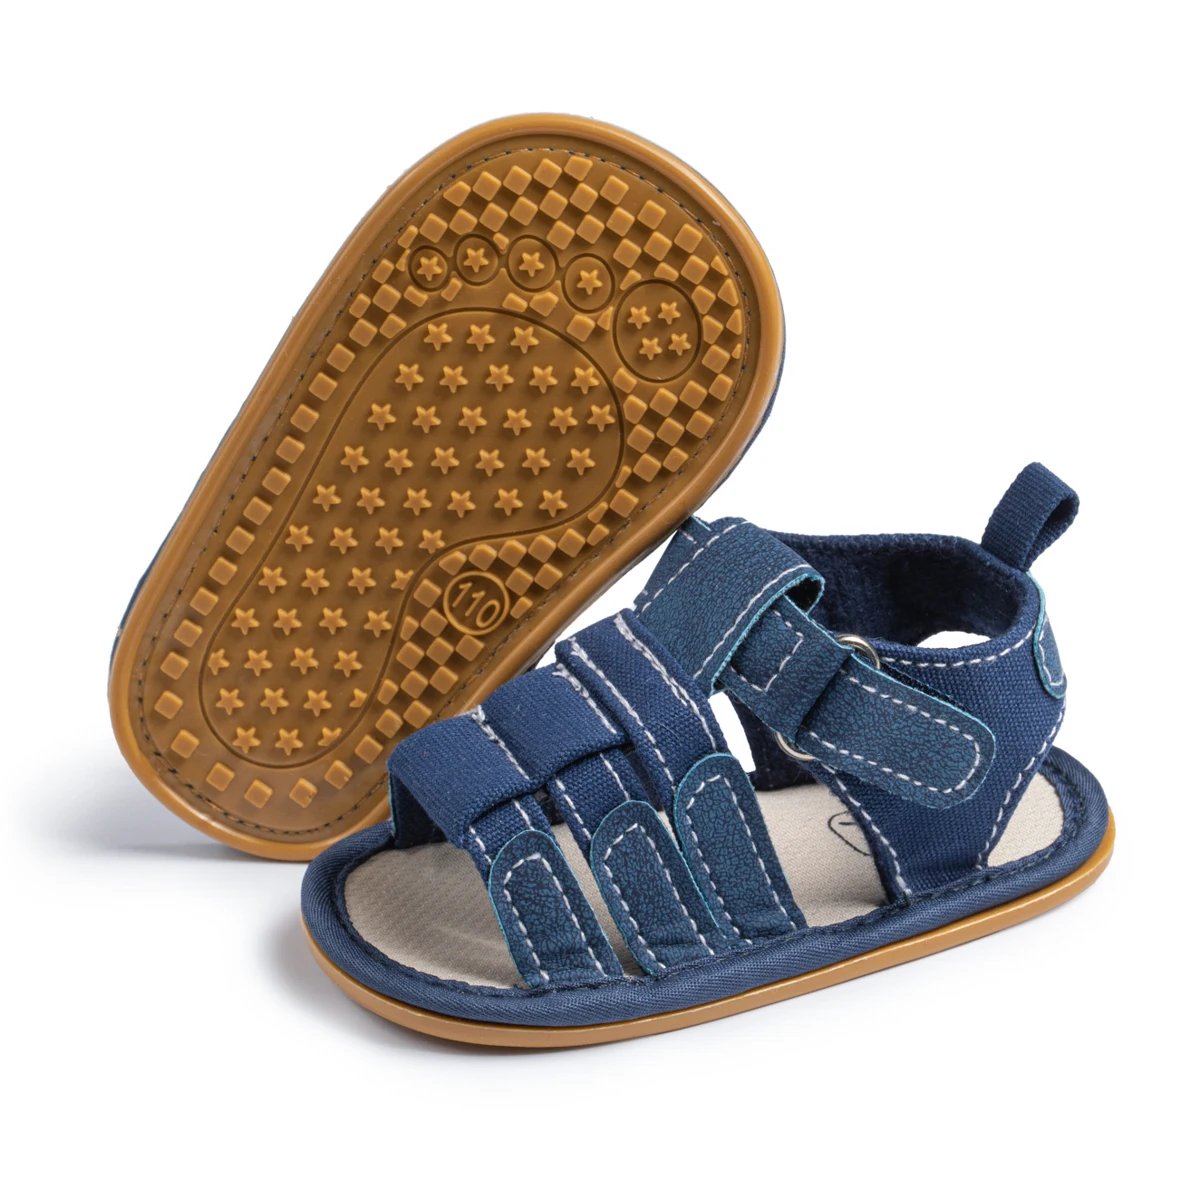 In-Stock Wholesale Infant Outdoor Summer Breathable Rubber Soft Sole Canvas Fabric Baby Boy Sandals